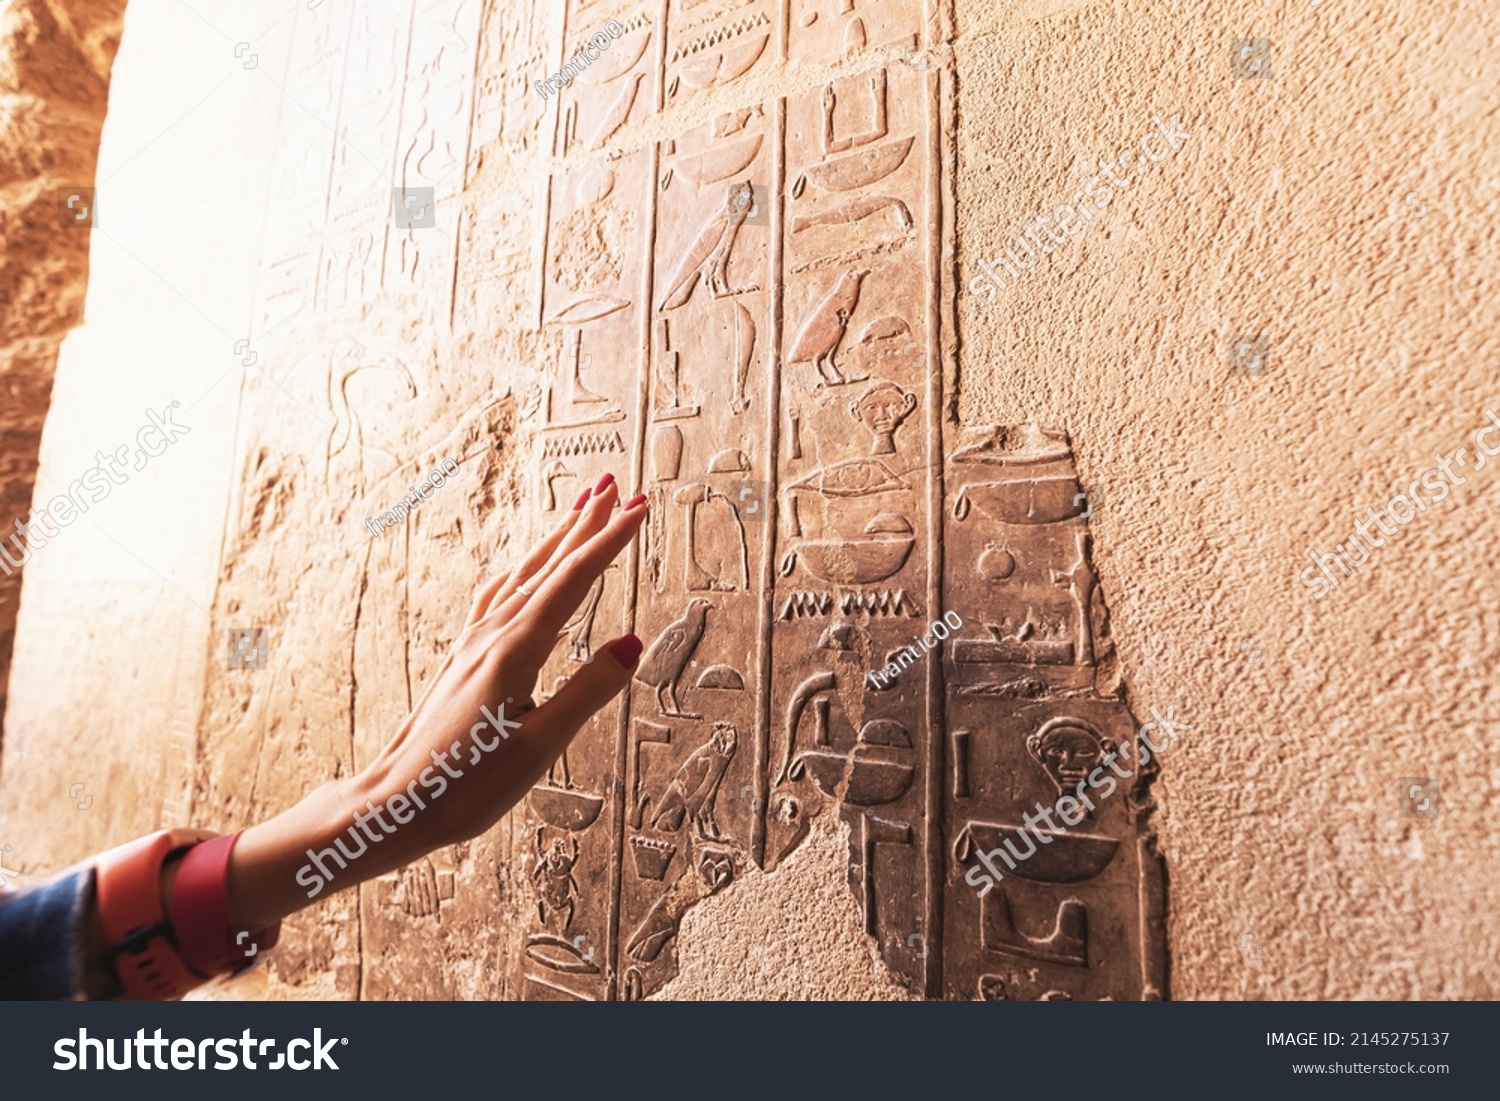 An Egyptologist or archaeologist reads and translates Egyptian hieroglyphs carved in stone #2145275137